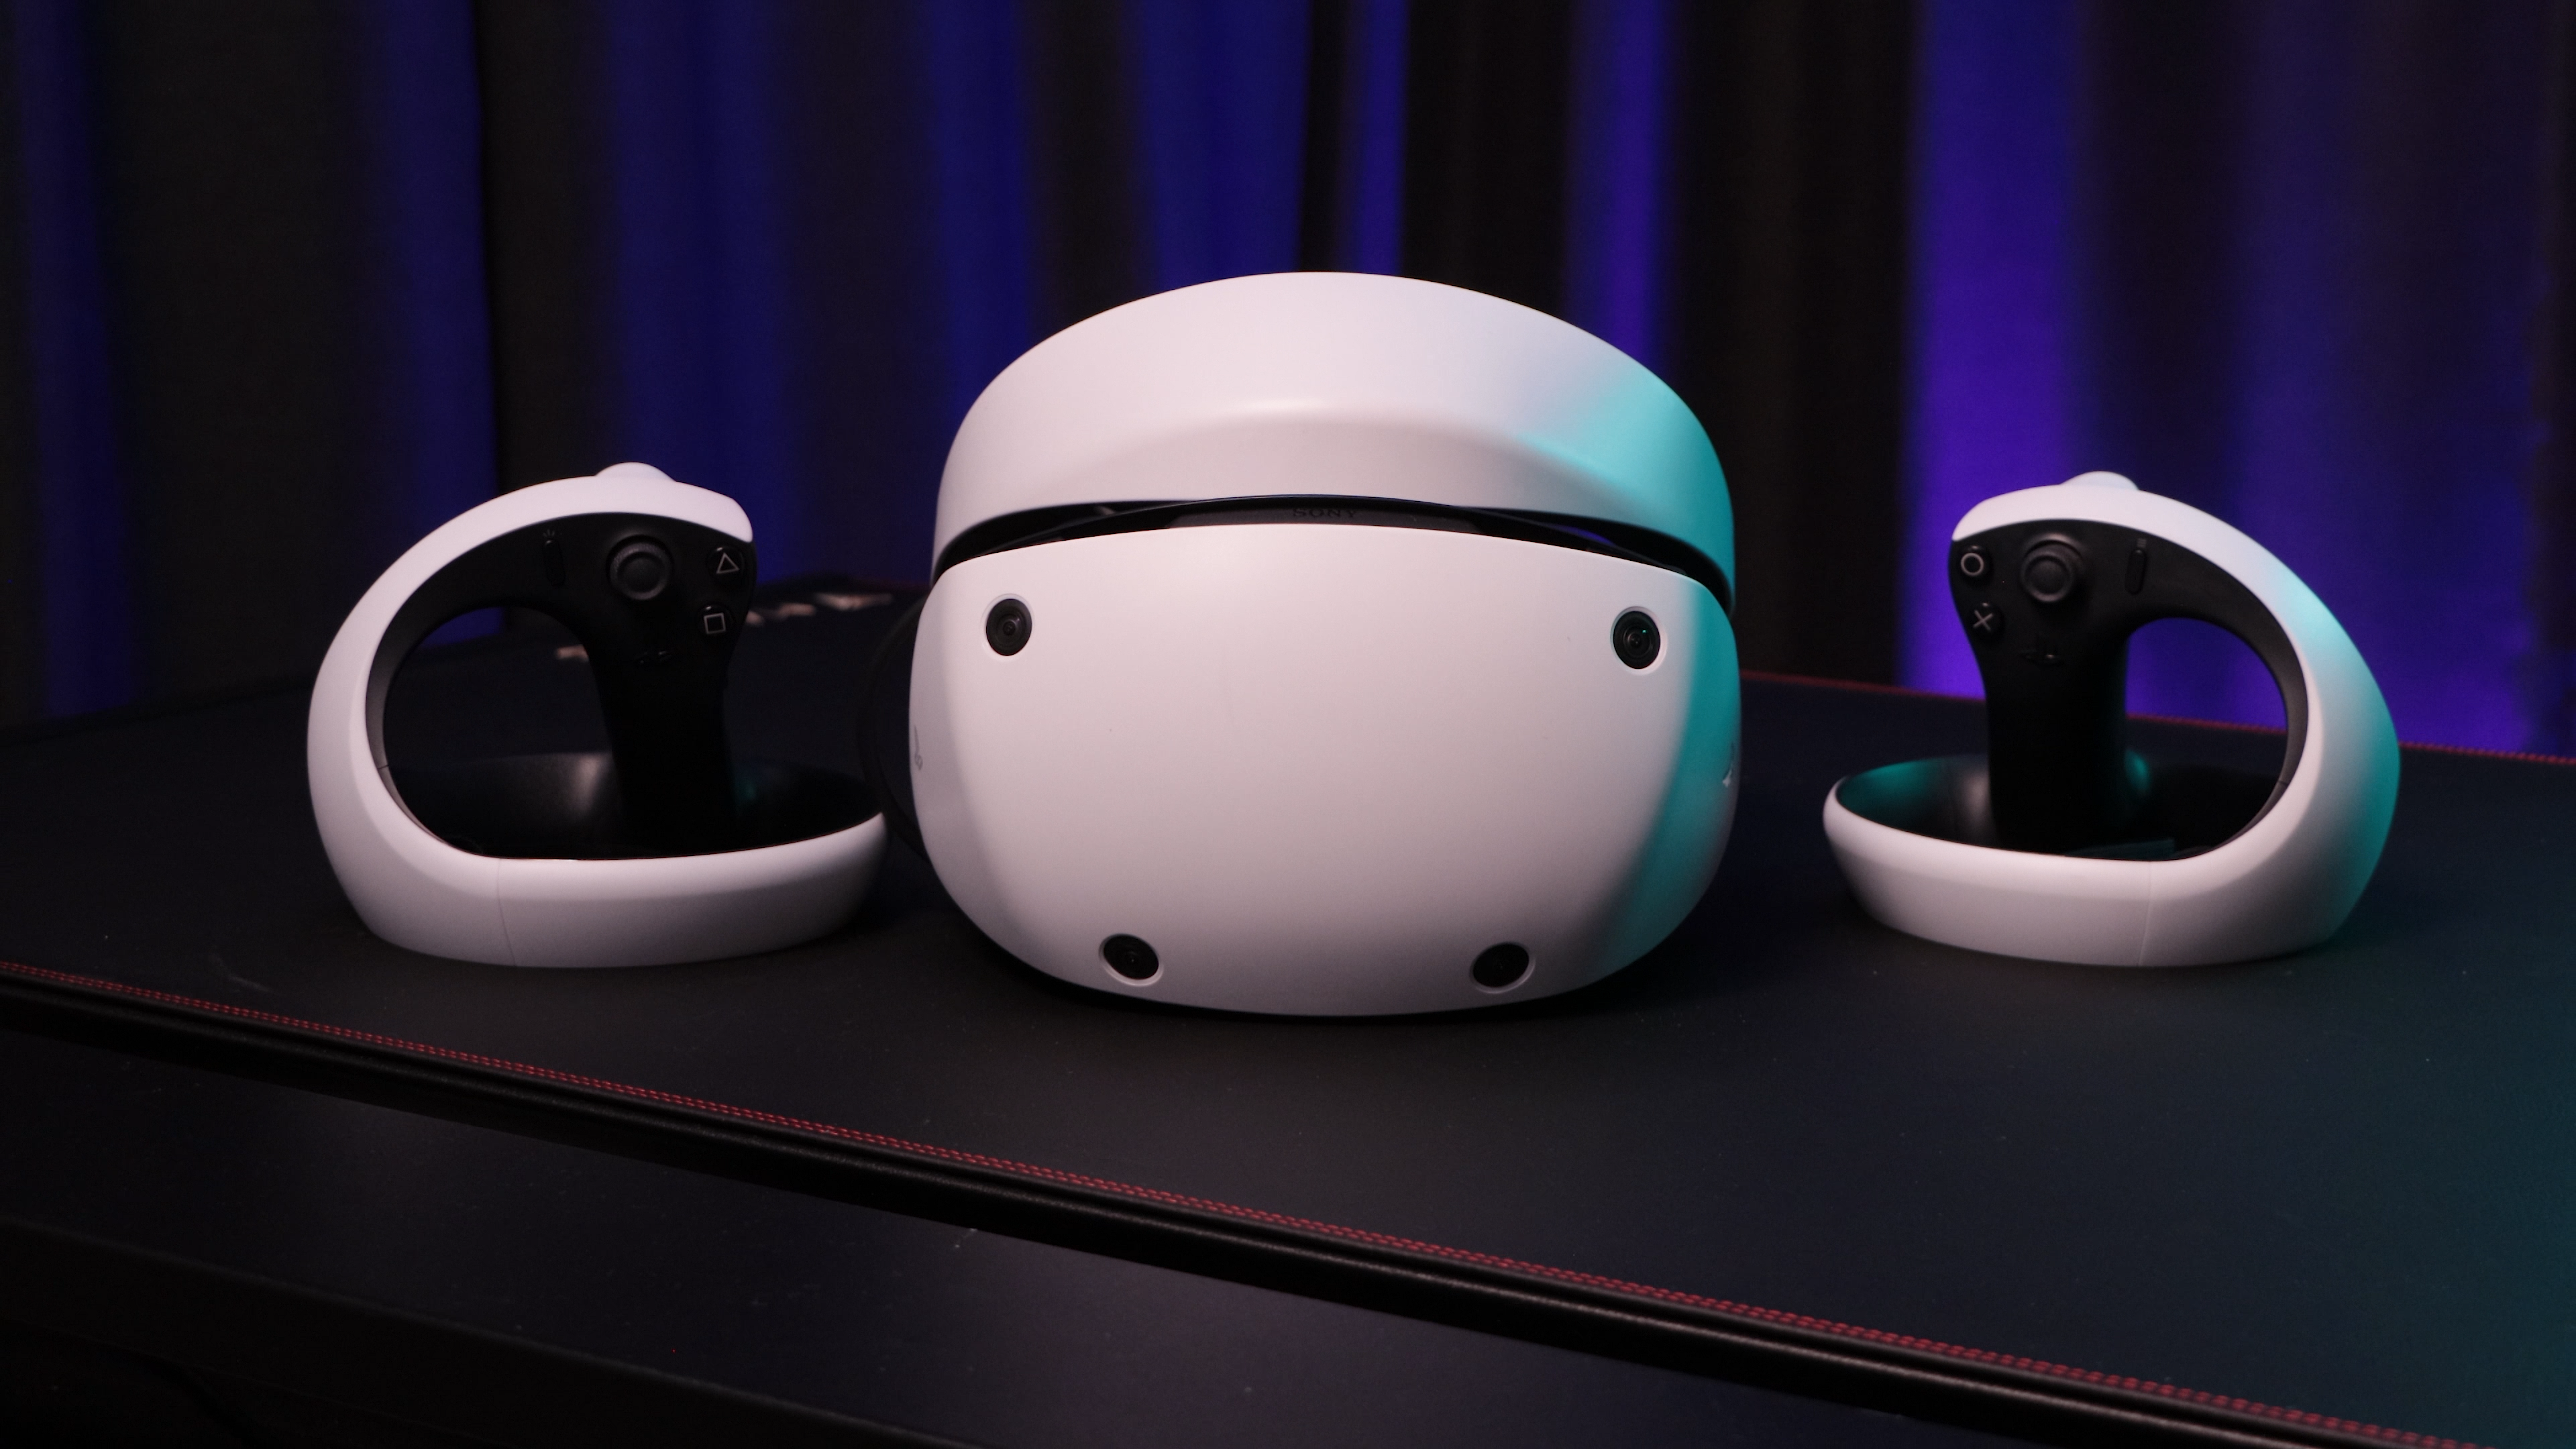 PlayStation VR review – if this is the future of virtual reality, sign me  up, PlayStation